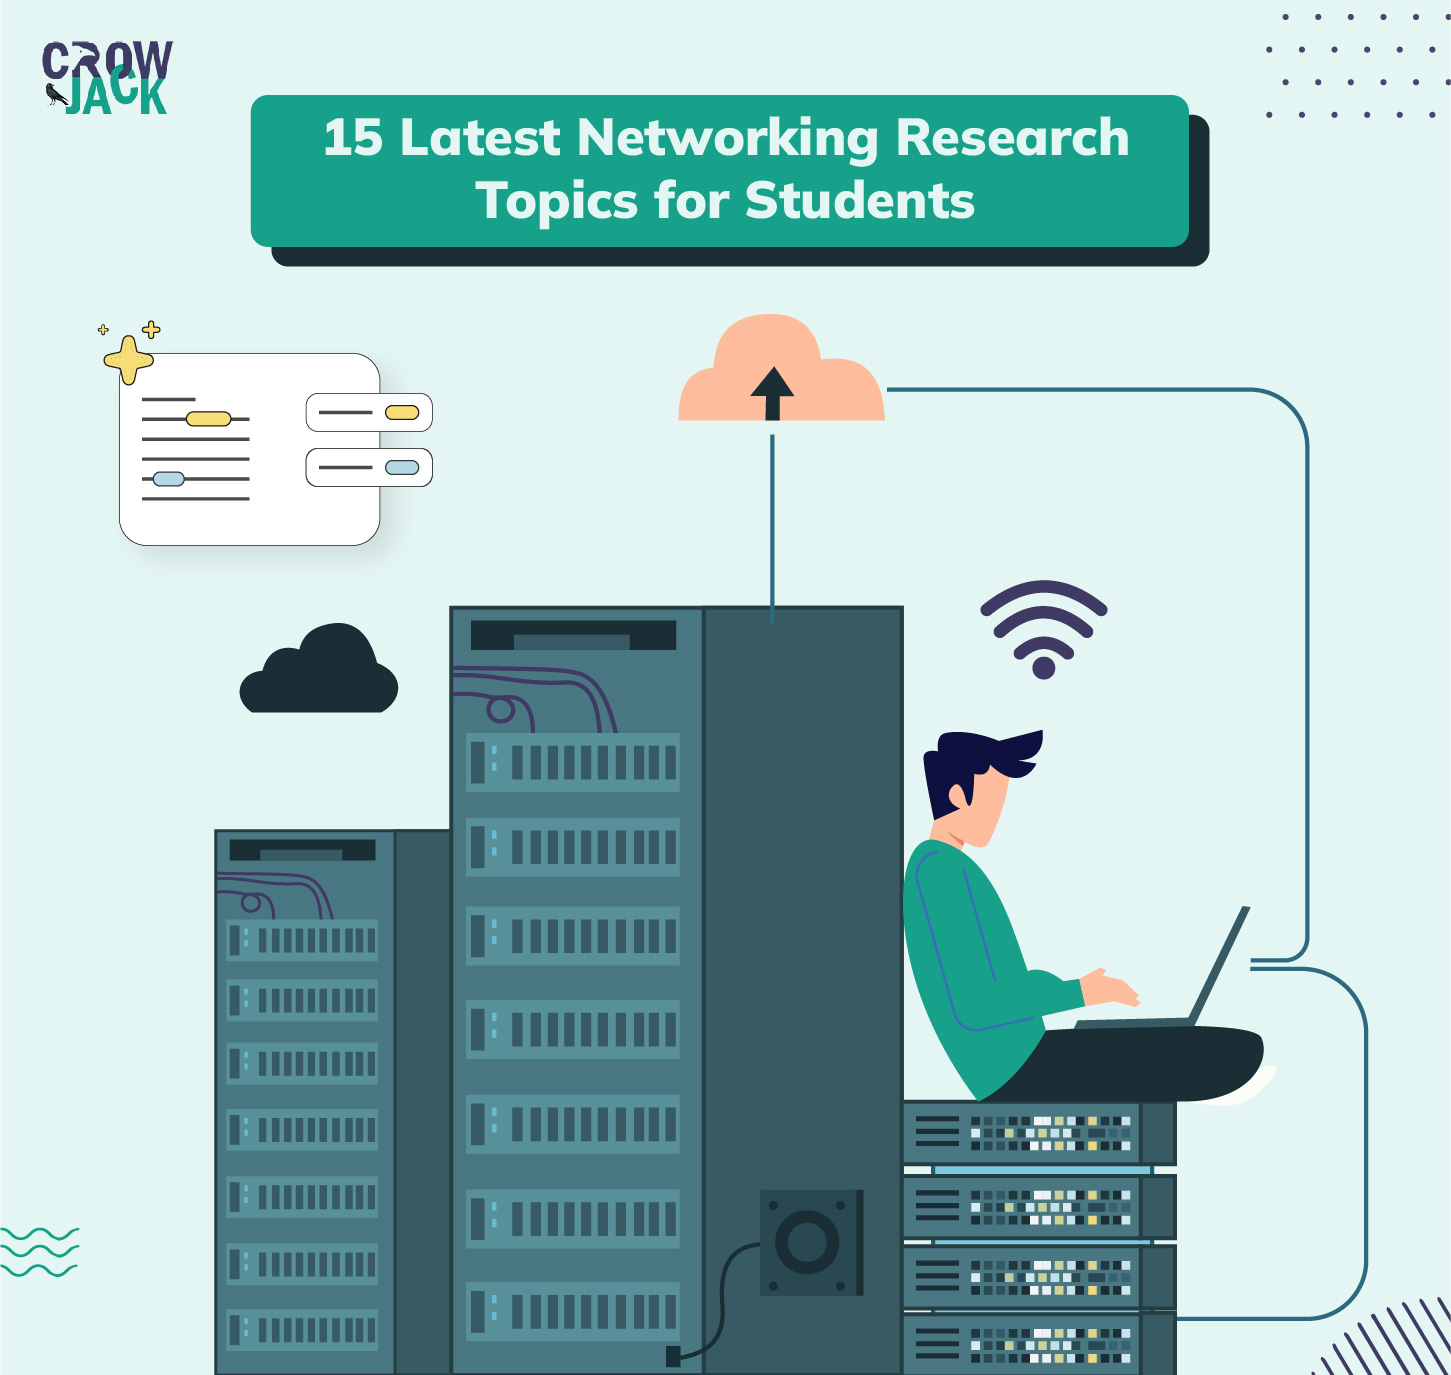 15 Latest Networking Research Topics for Students